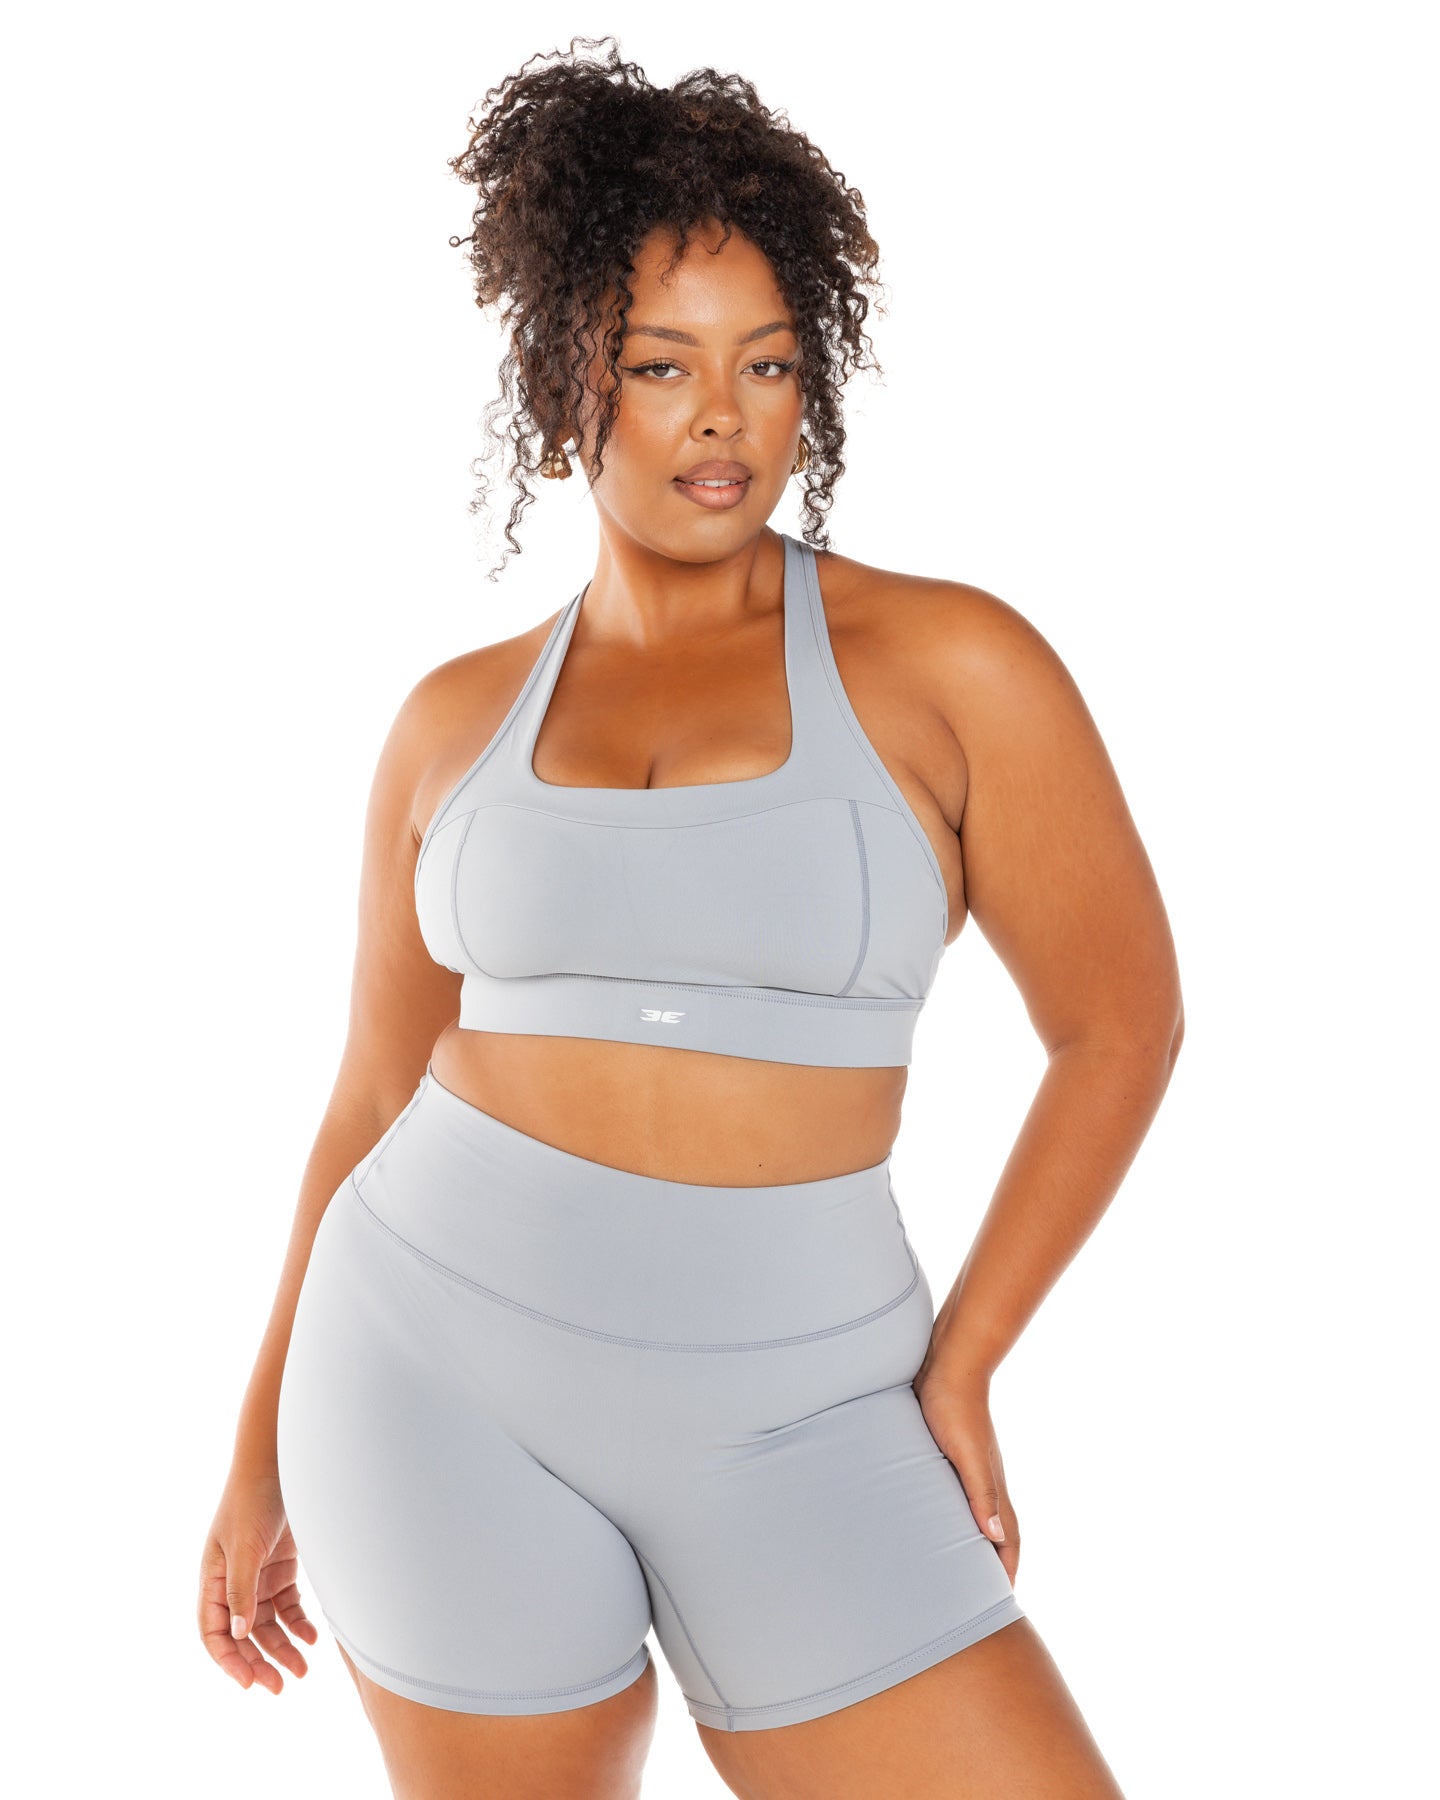 CARCOS Tank Tops with Built in Bras for Women Plus Size Summer